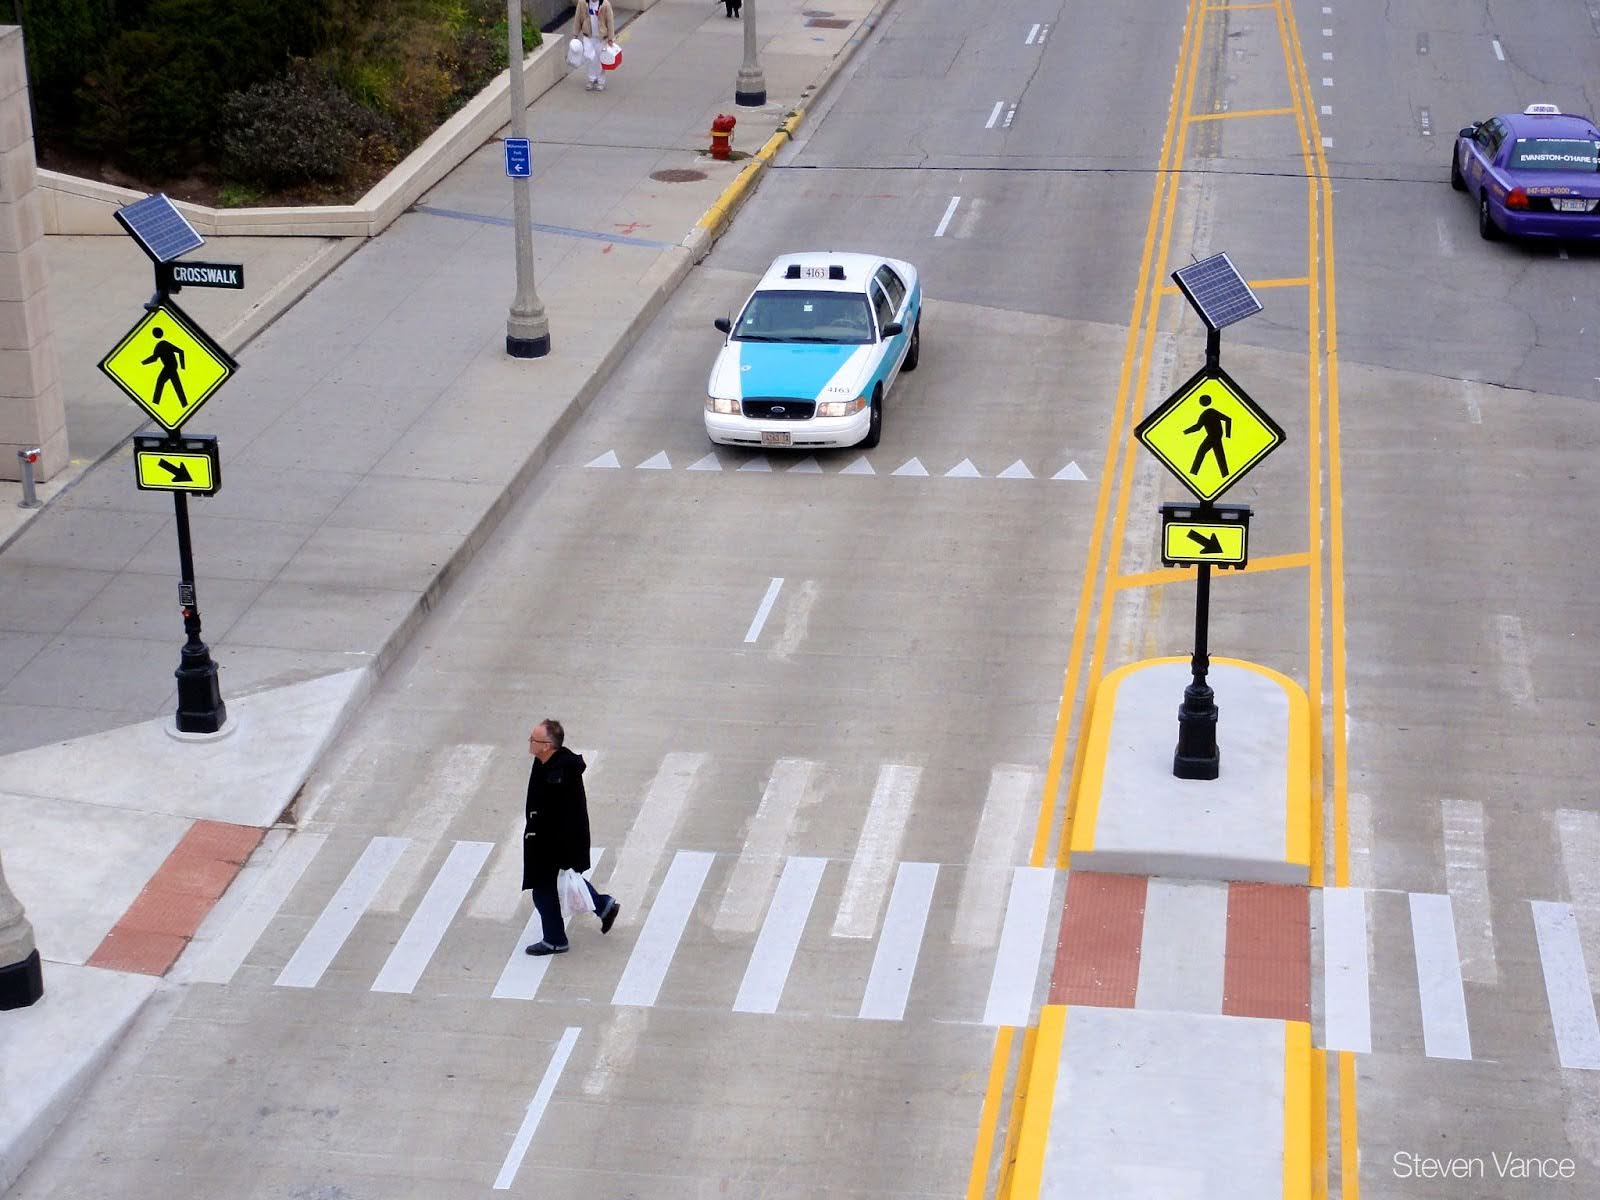 A pedestrian crosses a marked crossing that features two flashing rectangular beacons on either side of the street. A car slows to a stop several feet away.